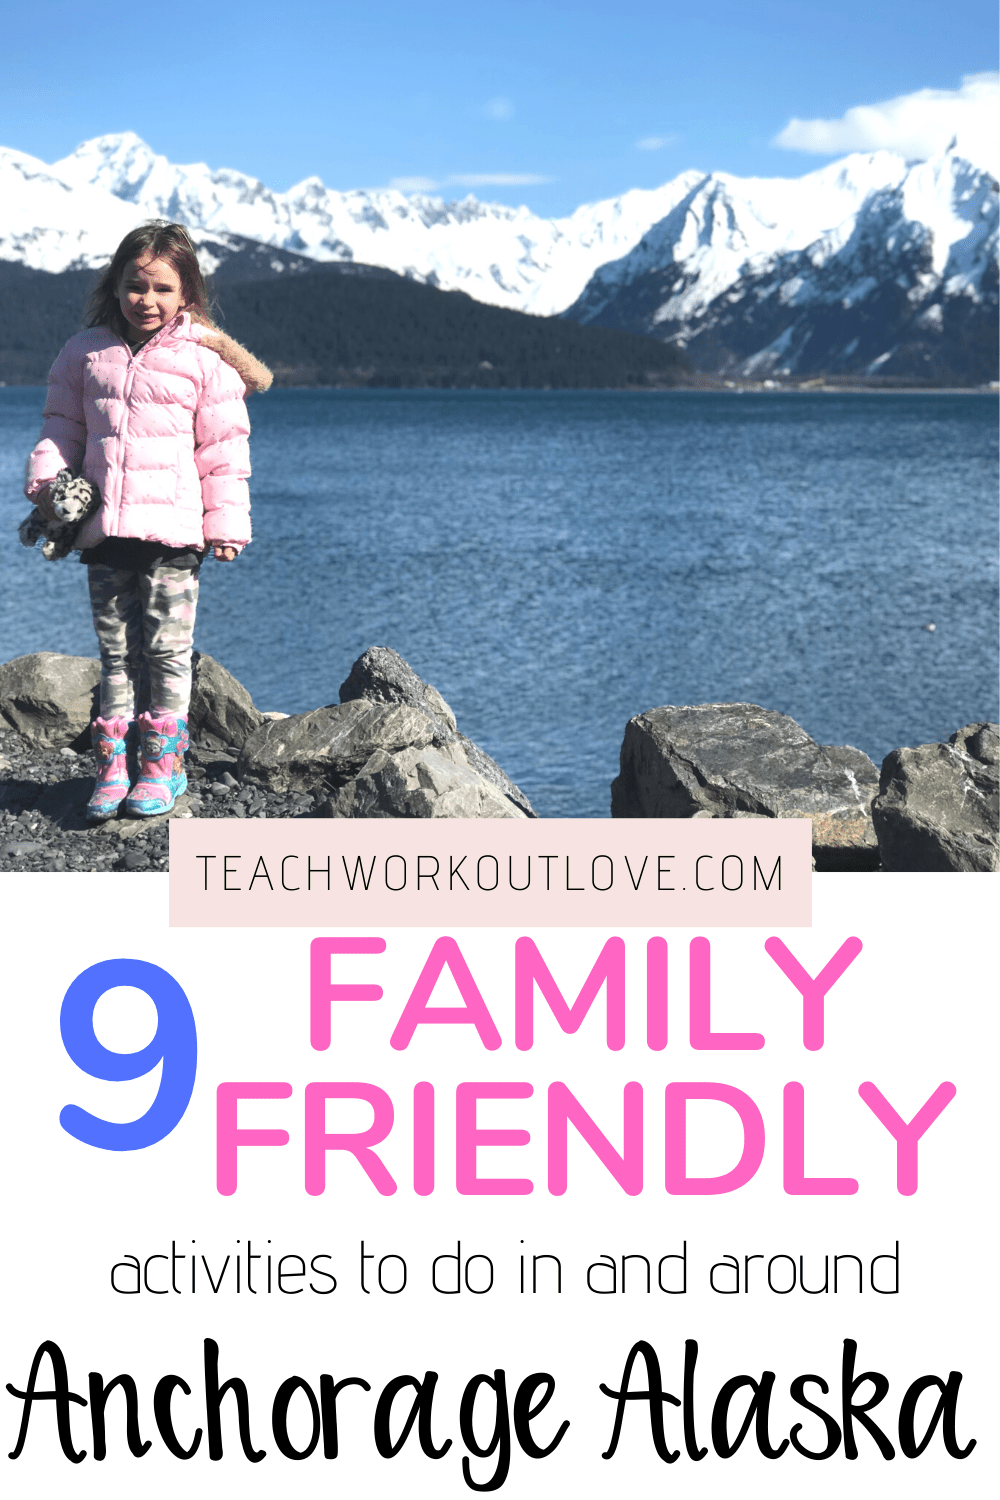 Have you ever been to Alaska? If not, you need to! This article shares 9 different family friendly activities in and around Anchorage, Alaska.